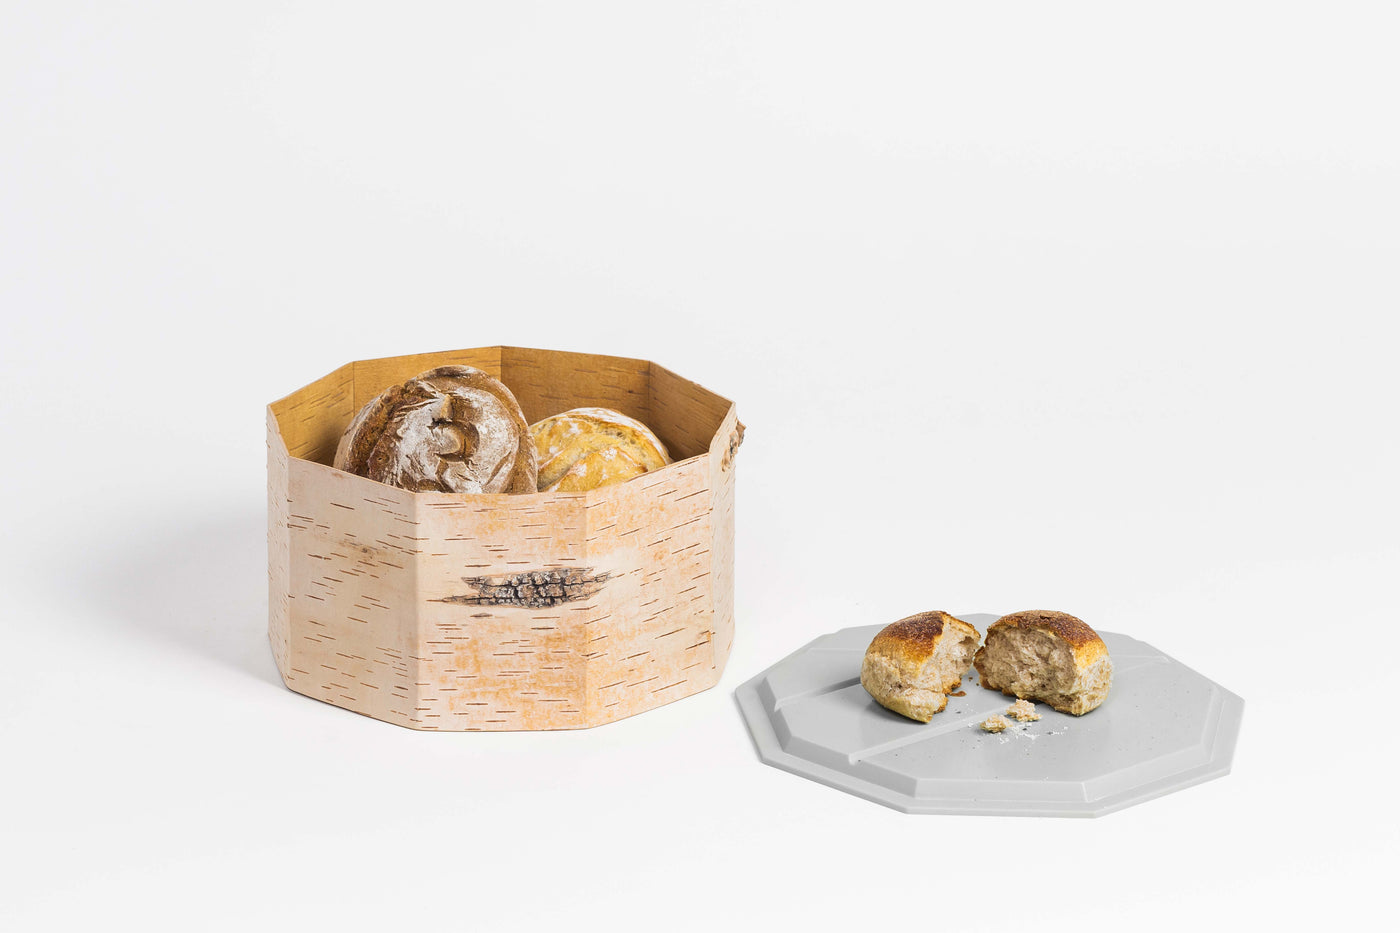 Tuesa Sai Birch Bark Breadbox-Cooking and Eating-BIRCH BARK, BOXES / ORGANISERS / CONTAINERS-Forest Homes-Nature inspired decor-Nature decor